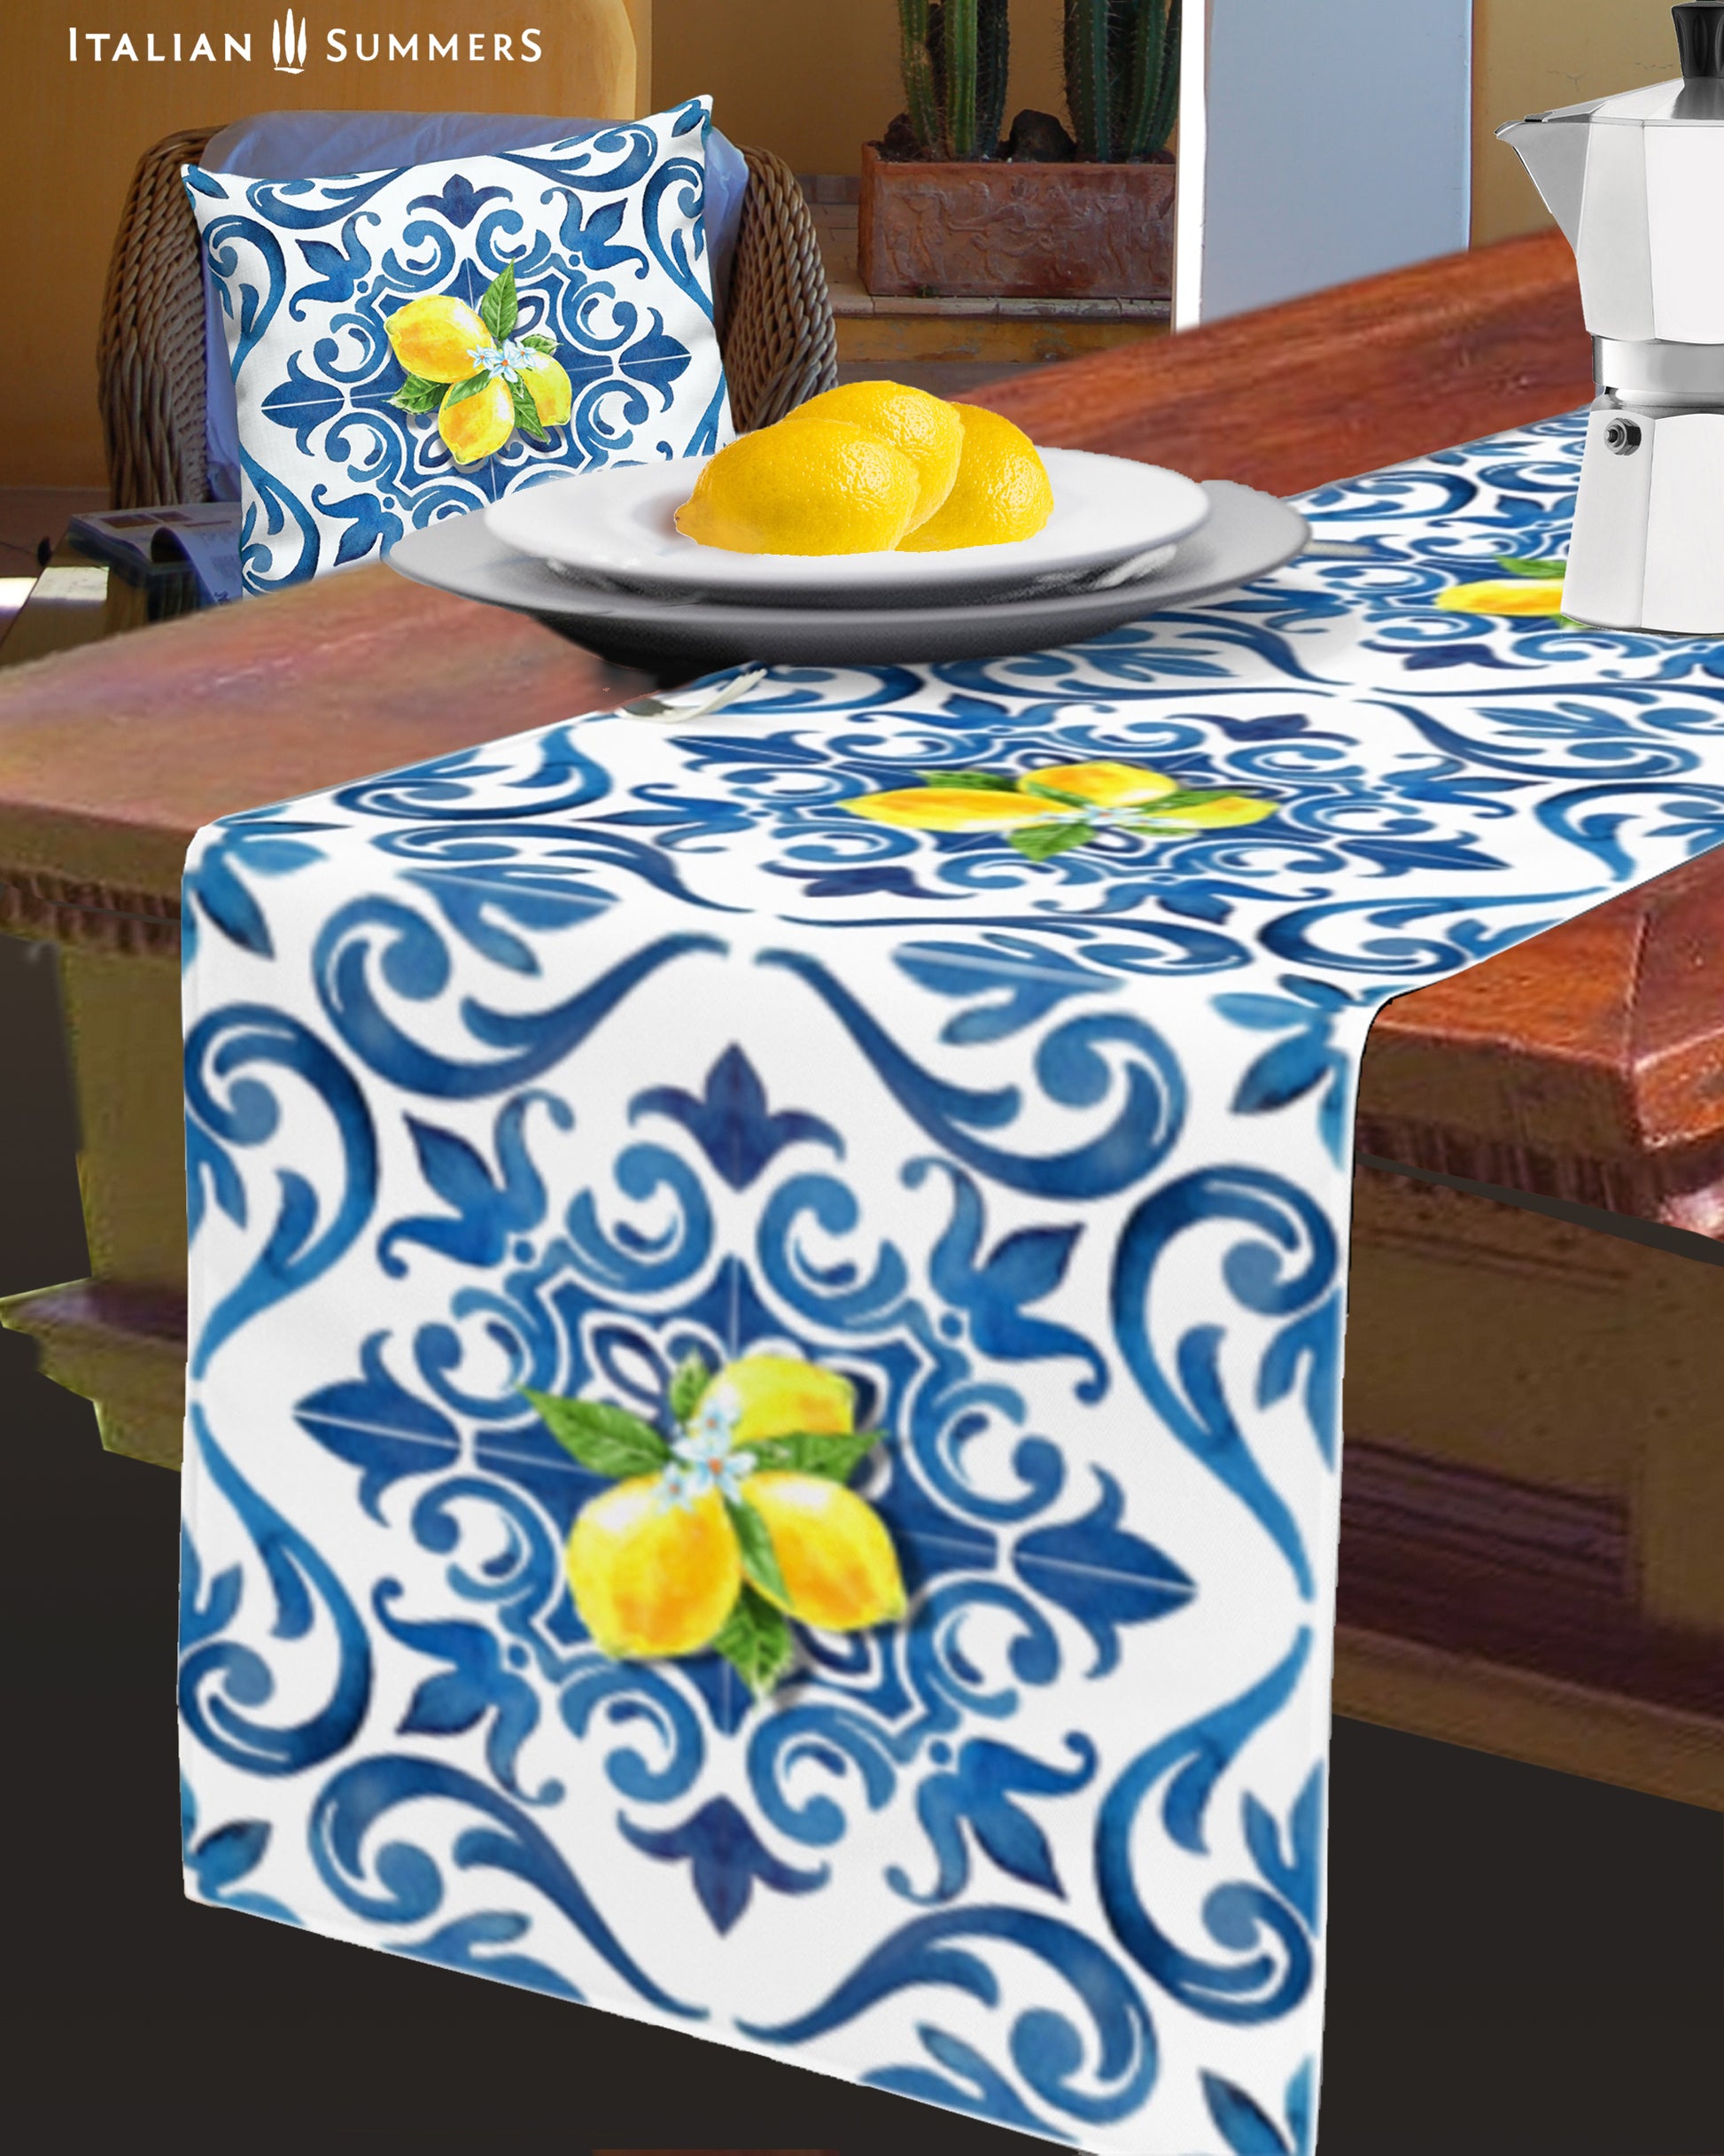 Italy inspired table runner printed with a blue and white pattern  of  Italian maiolica tiles and bundles of Sorrento lemons with flowers. A true Amalfi Coast decorational touch to any diningroom. Made by Italian Summers.